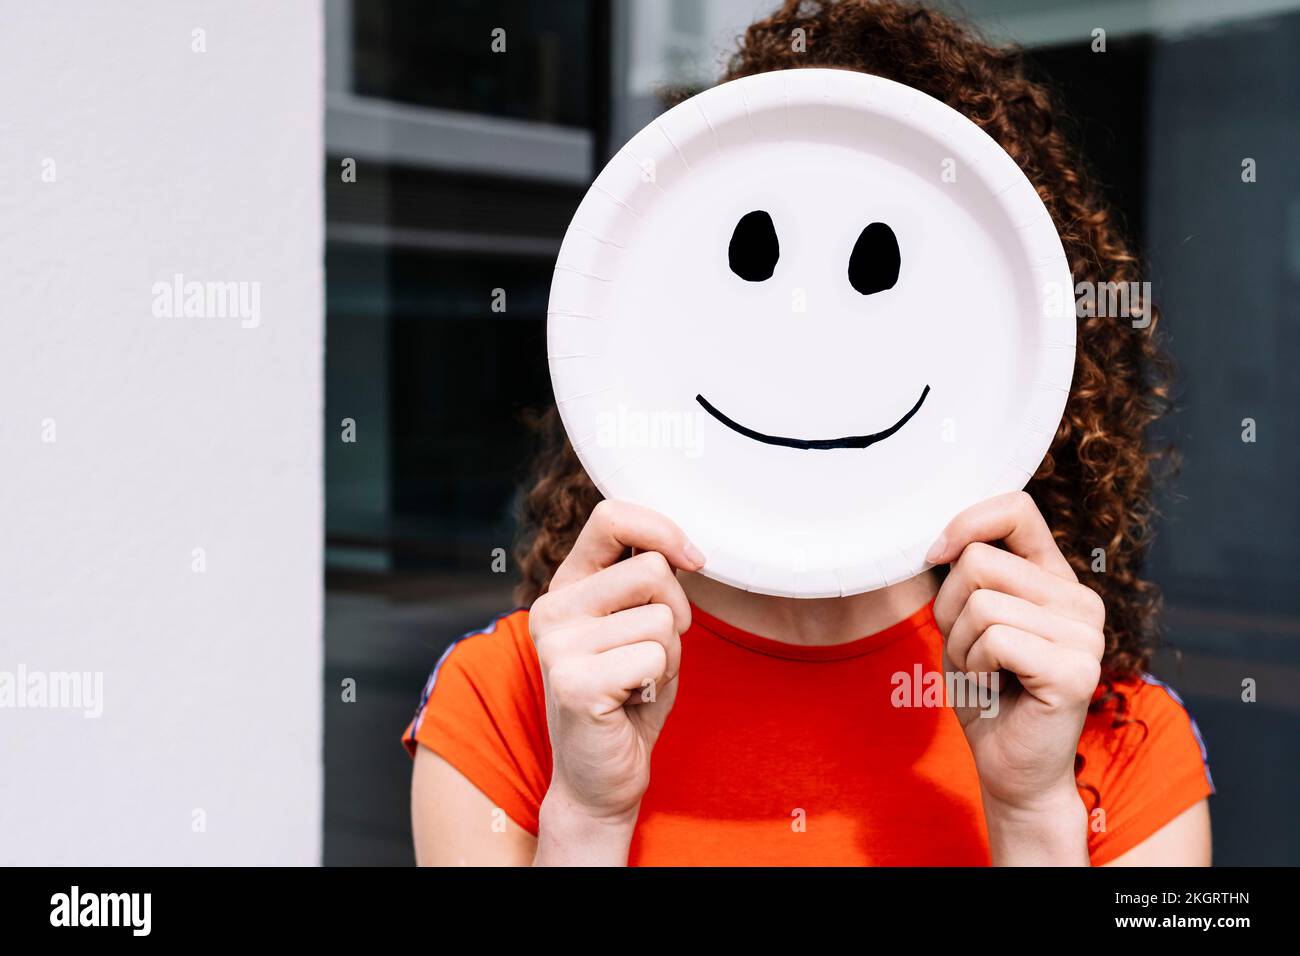 Young woman holding smiling emoticon plate over face Stock Photo